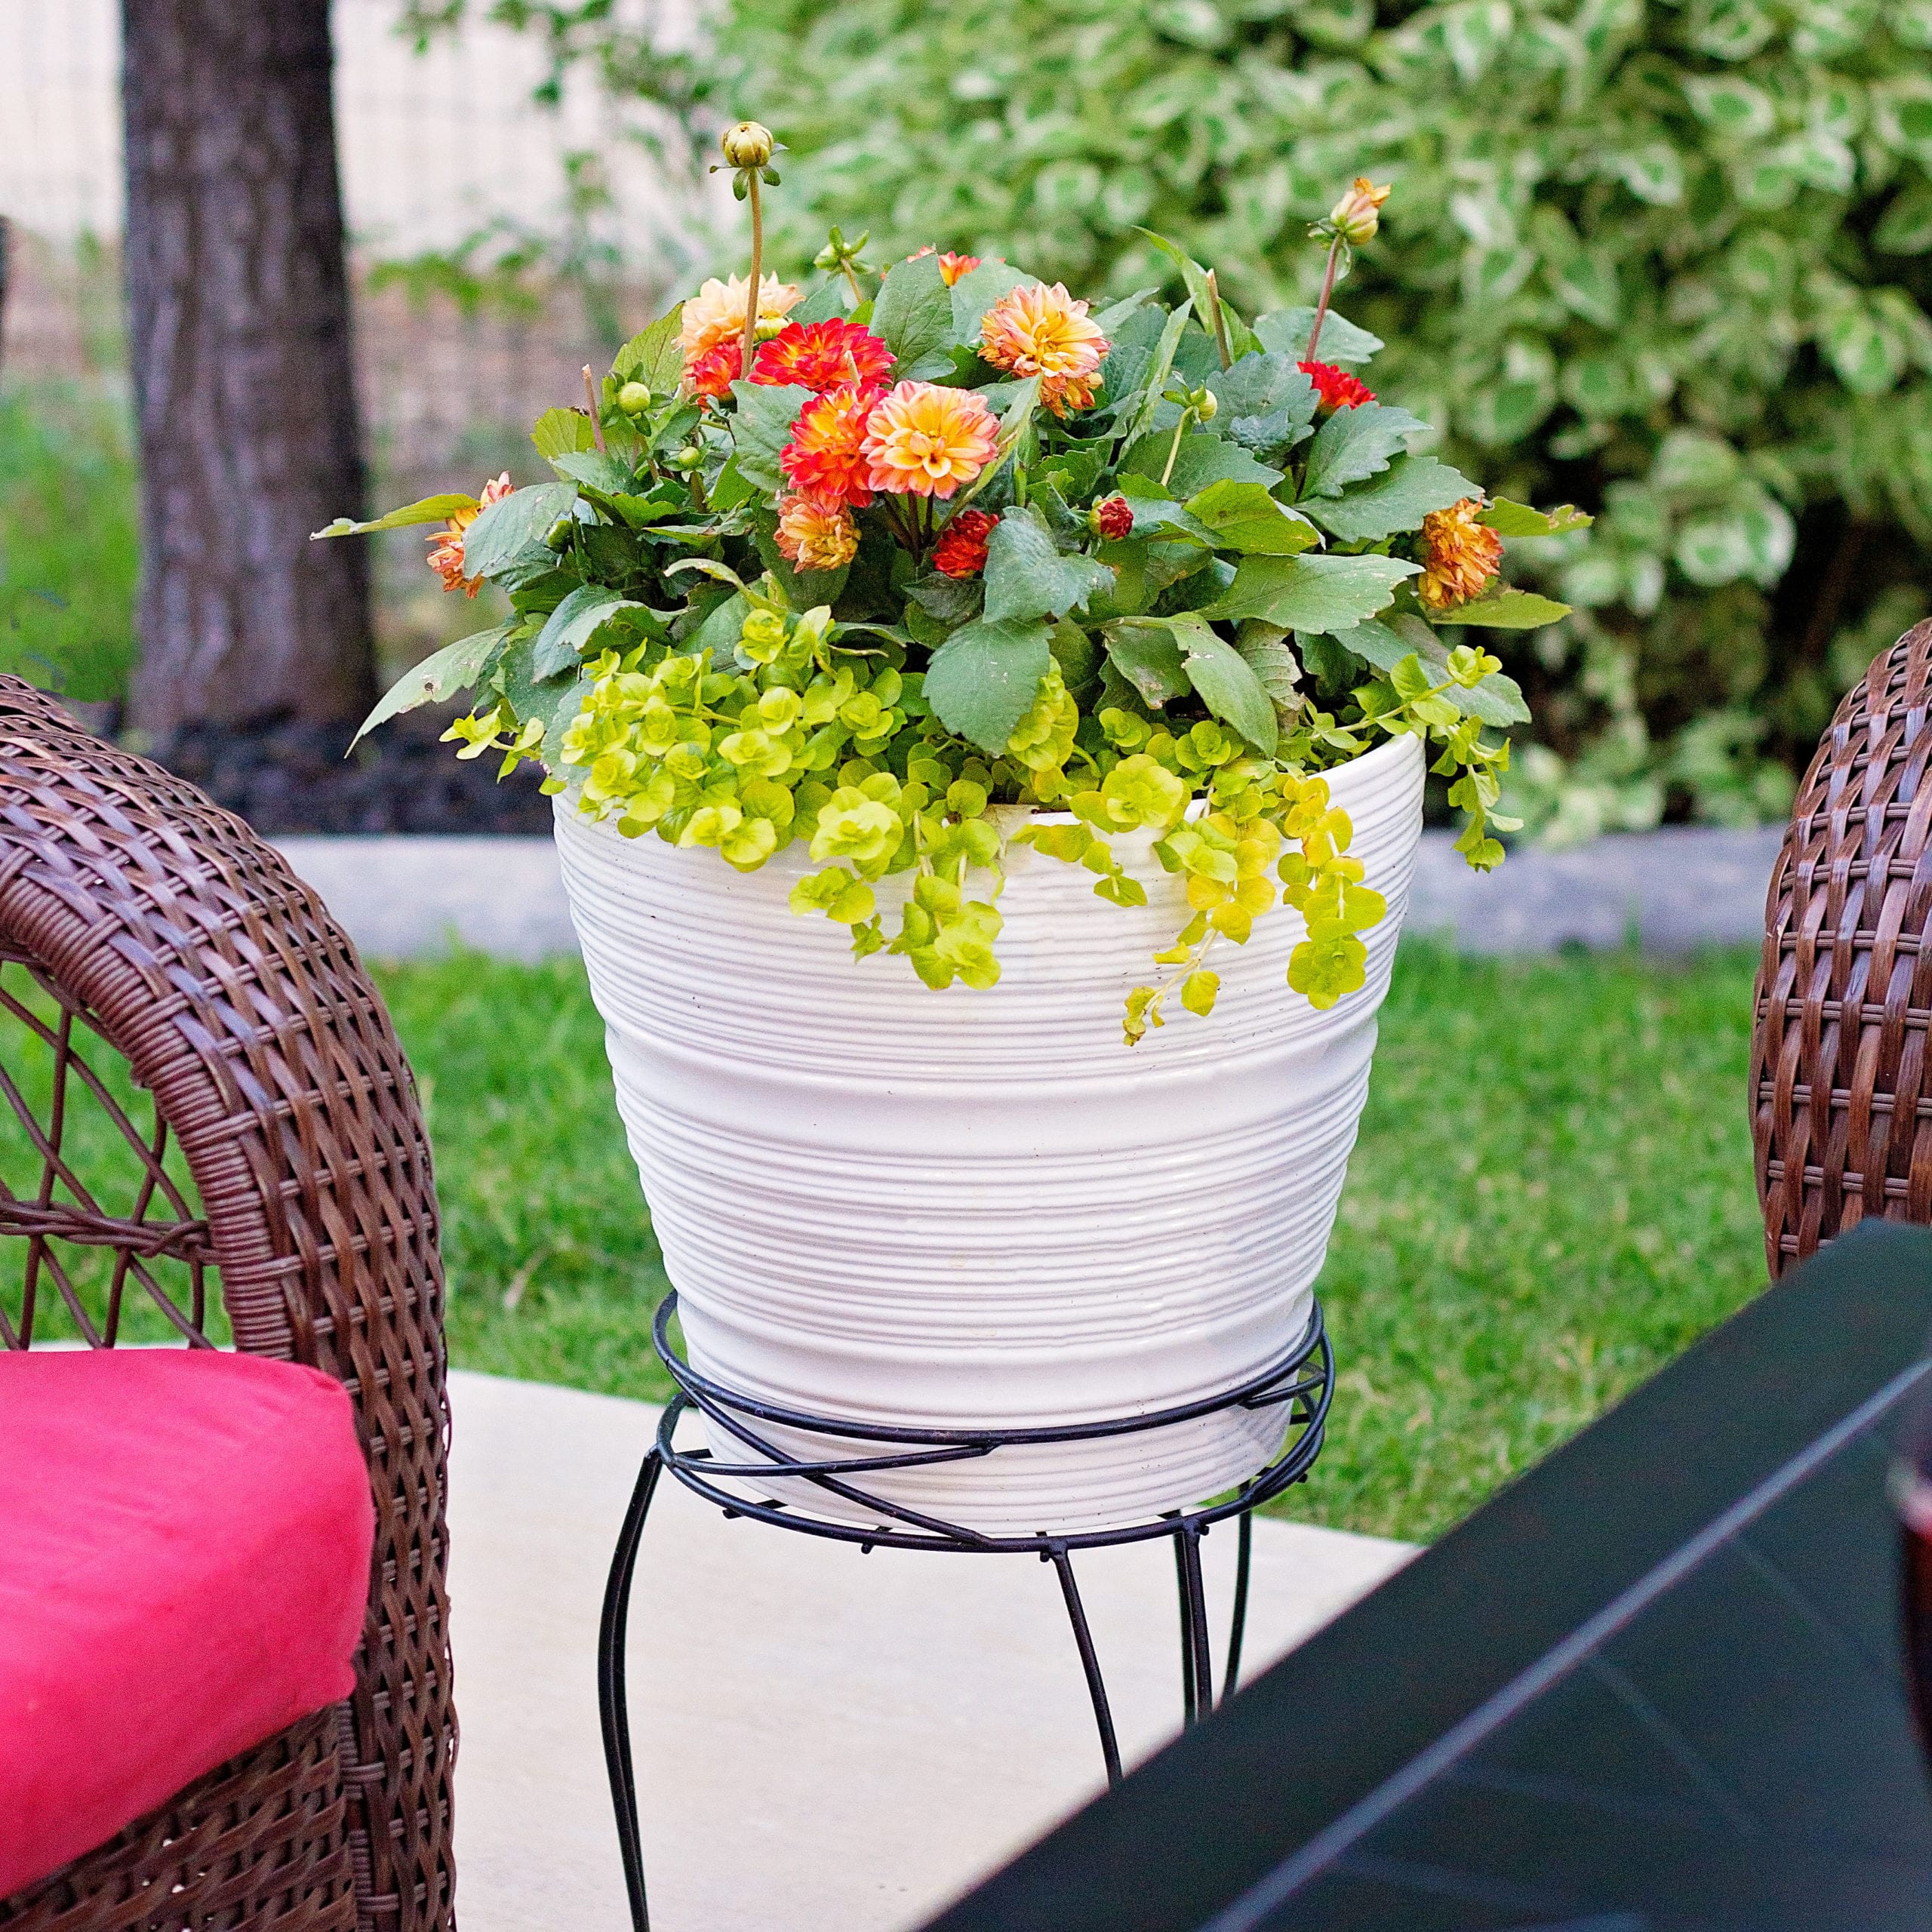 6 Tips To Help You Organize Your Outdoor Space